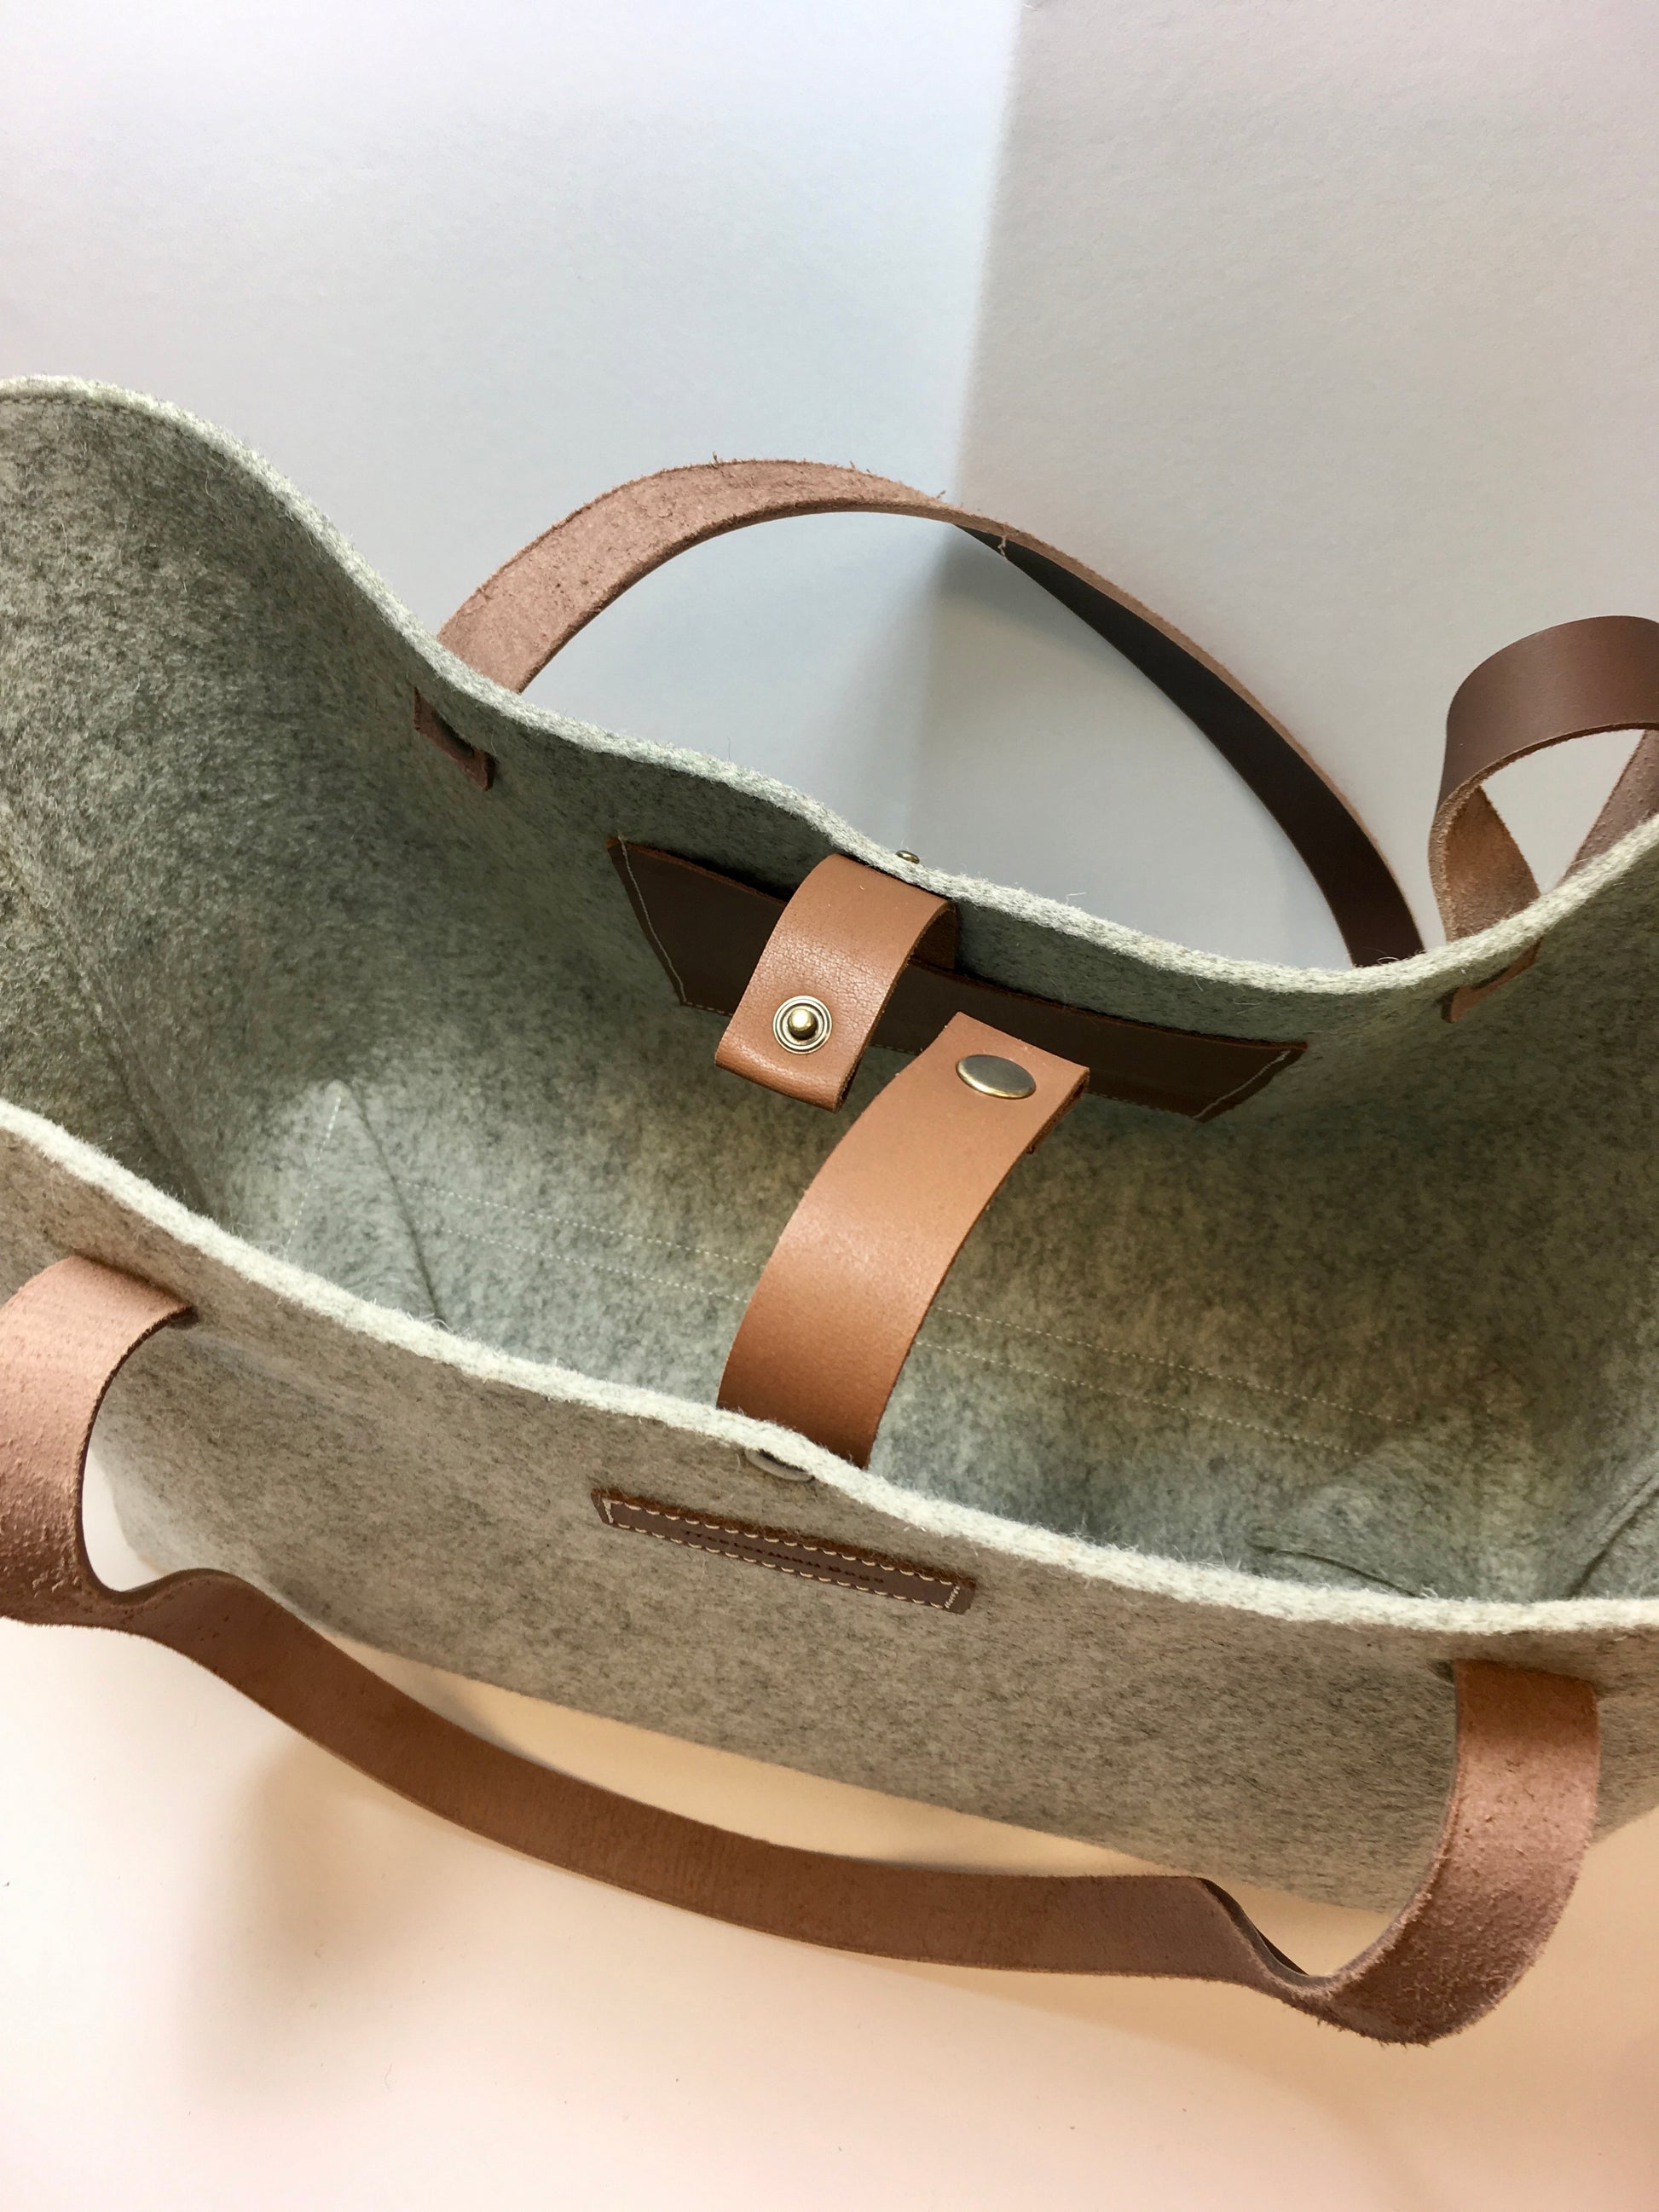 Interior of felt bag with leather details